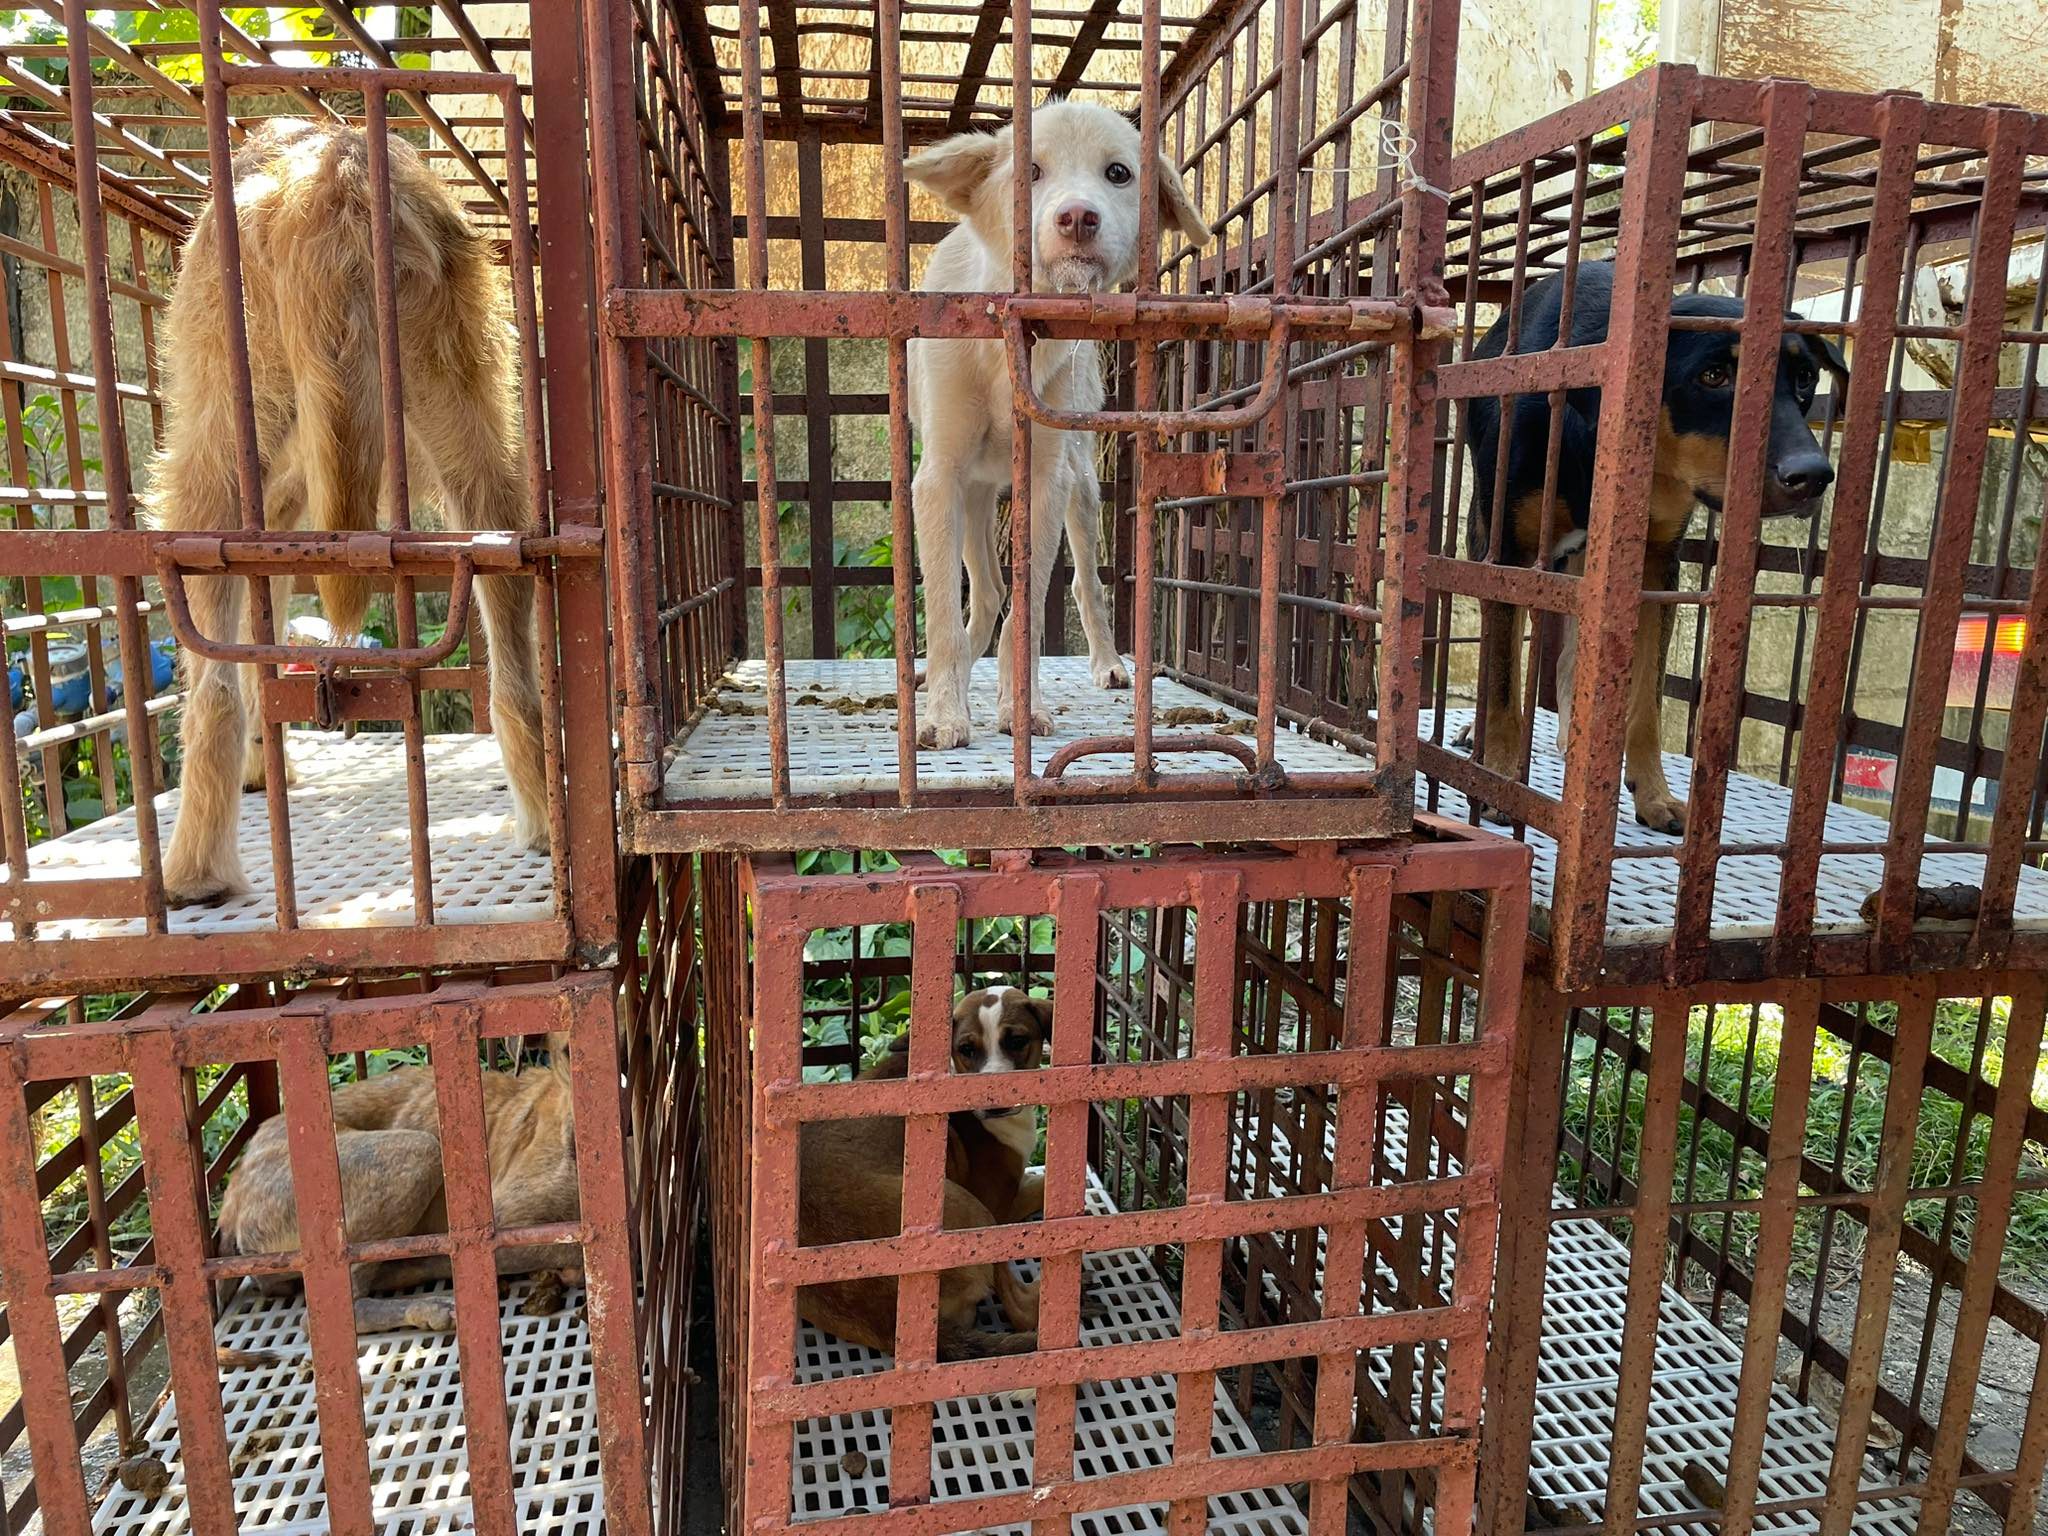 Boracay rounds up stray dogs ahead of Holy Week tourist rush